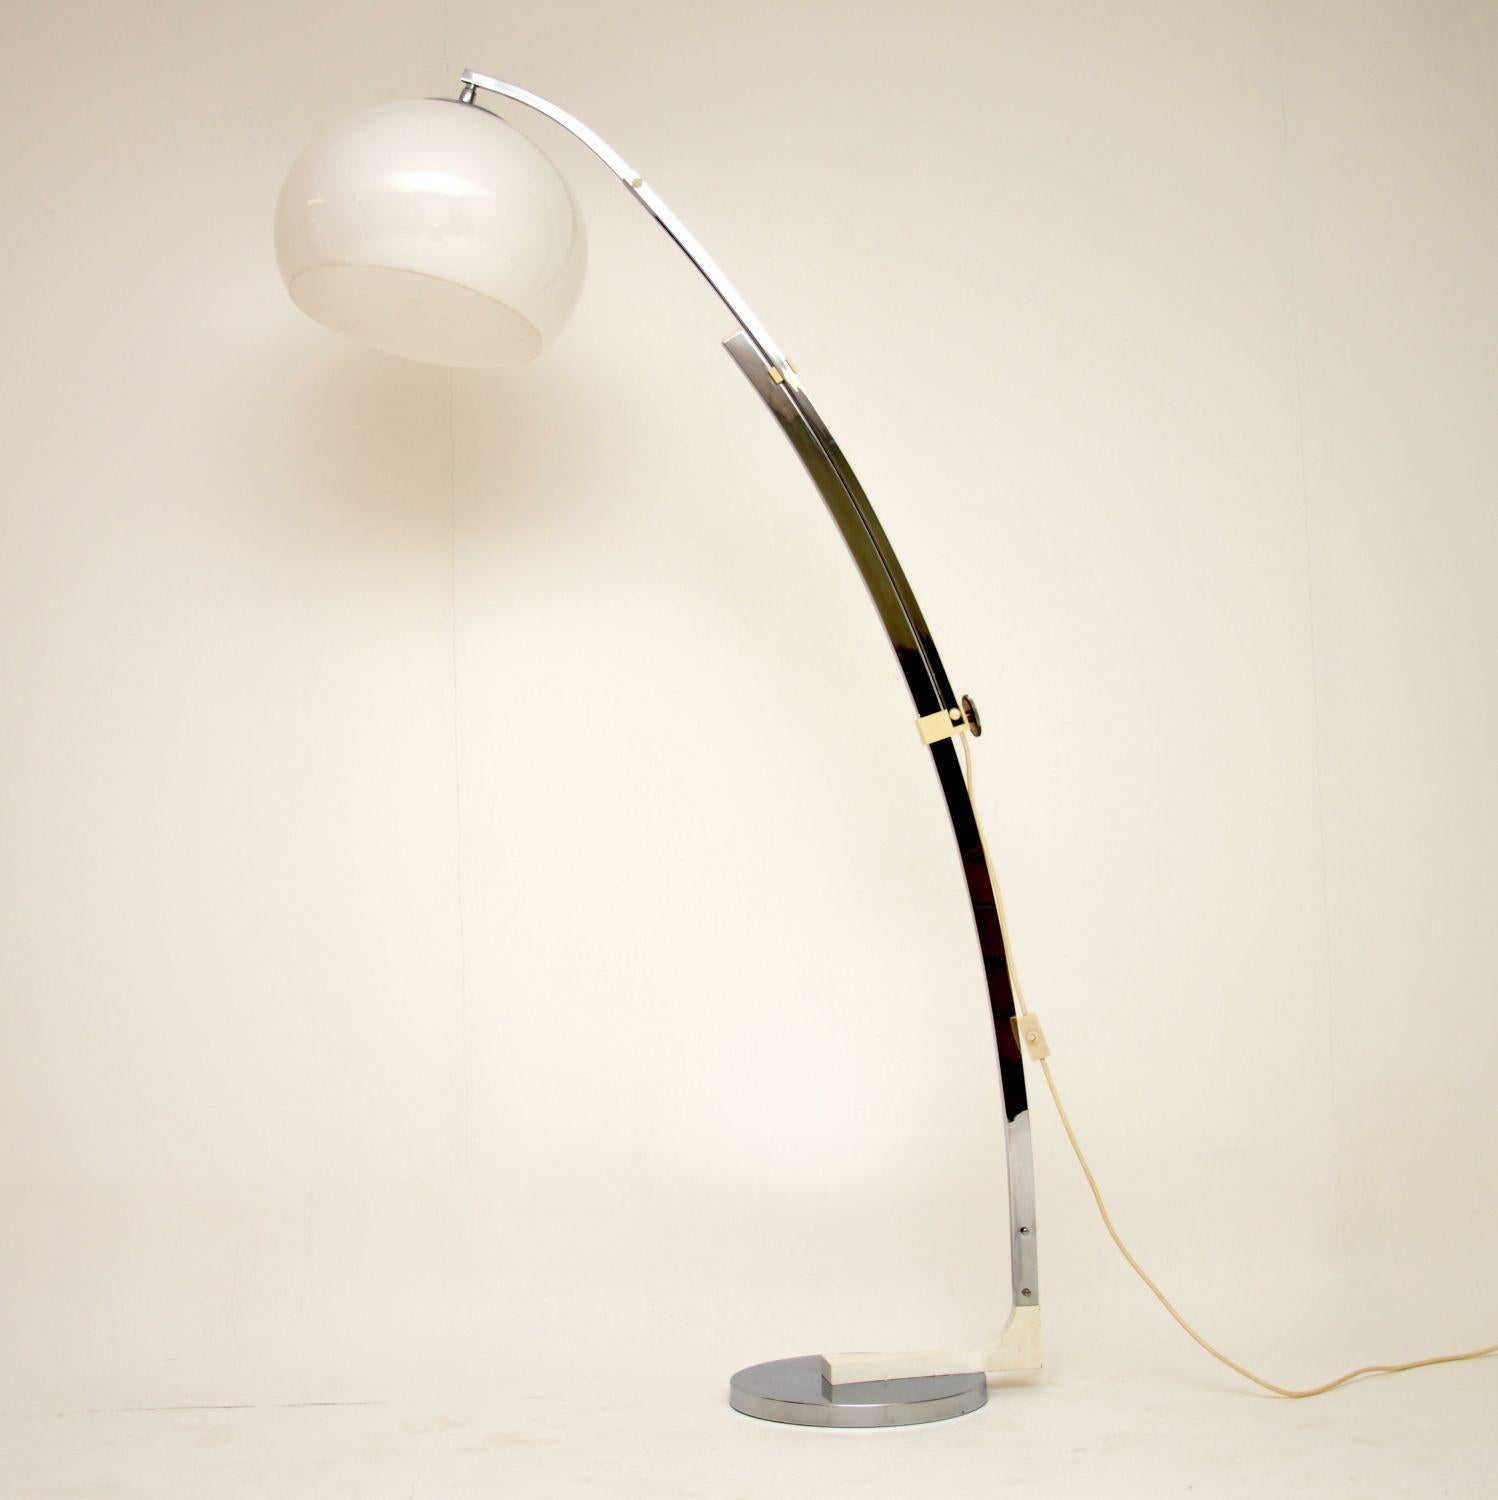 An amazingly beautiful vintage arc lamp, this was made in Italy and dates from the 1970s. It can be extended and lowered as seen in the images, the plastic shade can also be tilted and rotated. This is in superb condition for its age with barely any